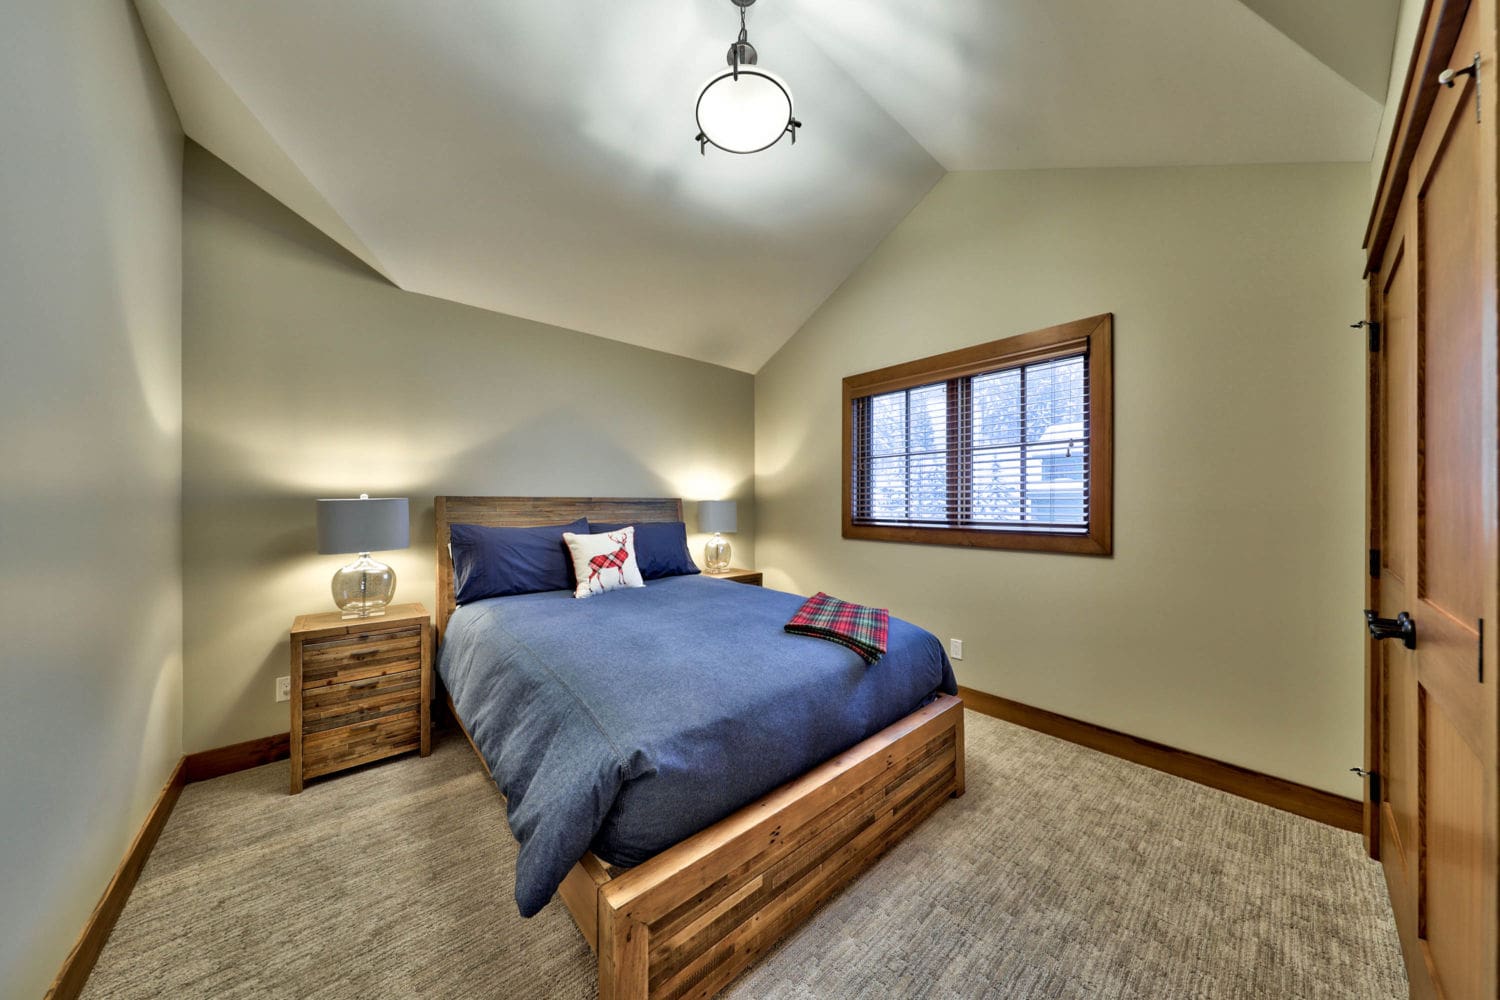 Third bedroom with vaulted ceilings in a timber frame log home